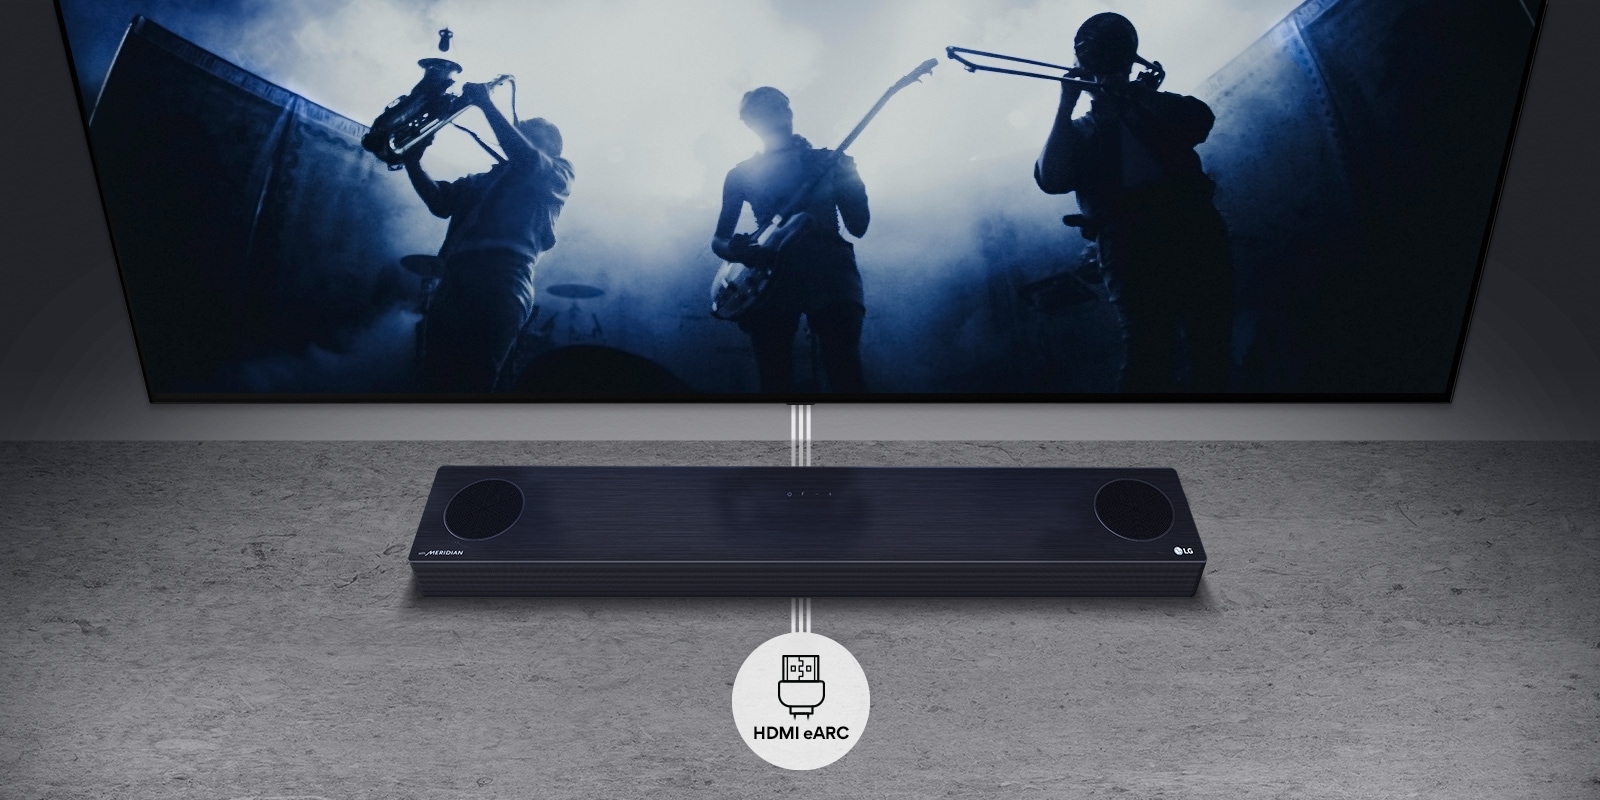 TV is on the wall. TV shows a group of band in black silhouette. LG Soundbar is right below TV on a gray shelf. There is a HDMI eARC icon below the soundbar.